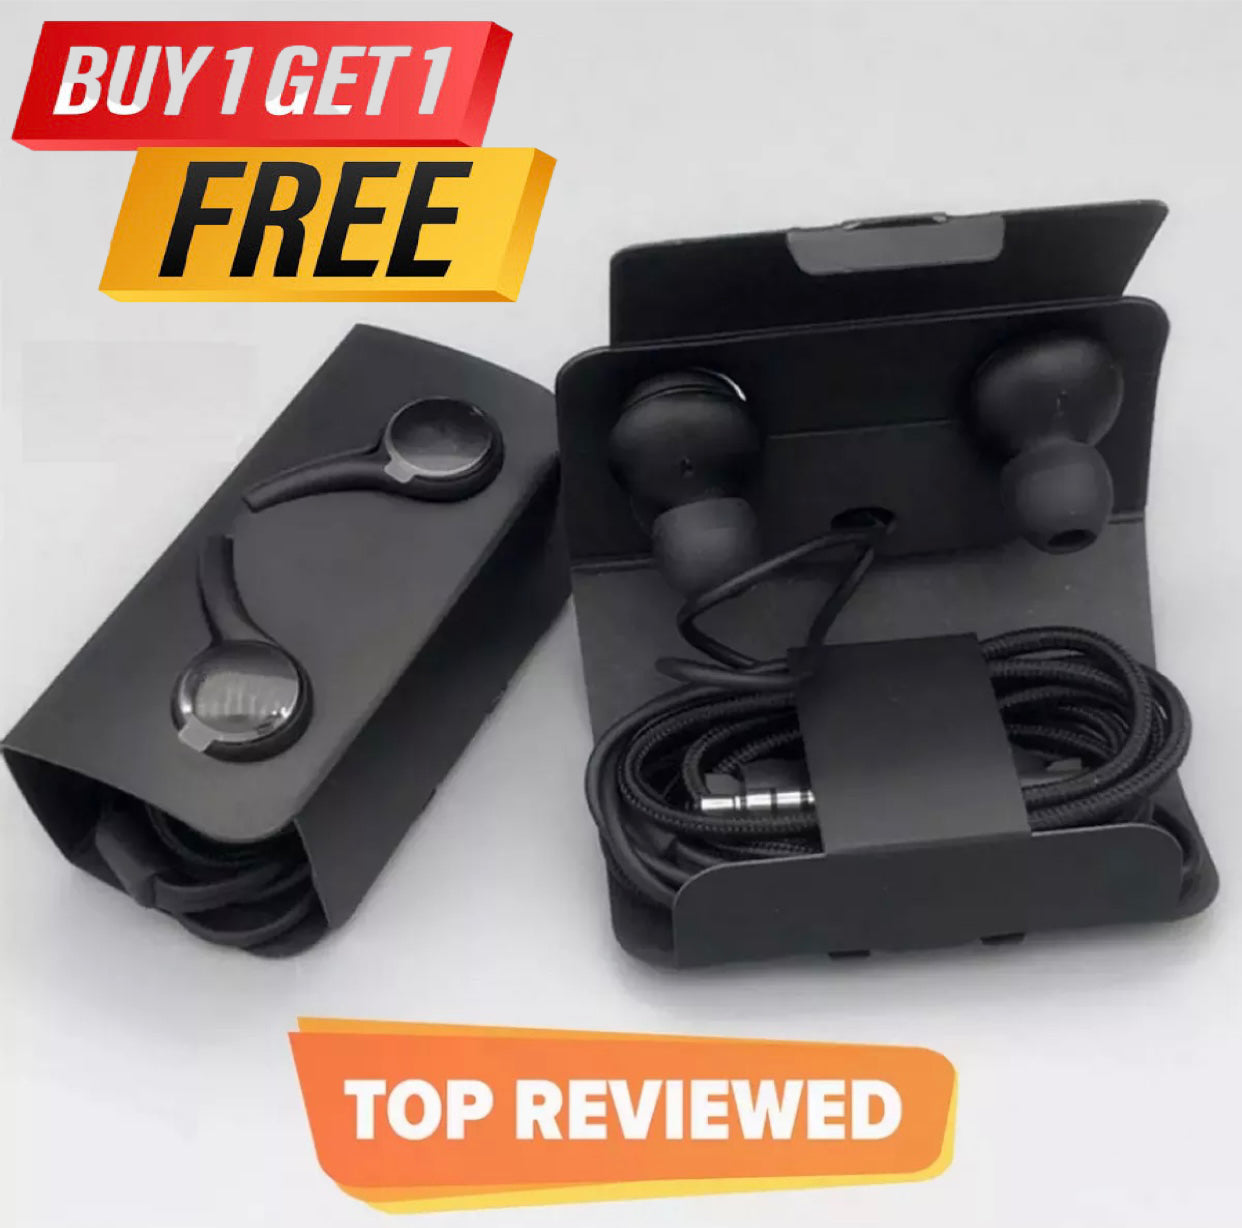 (Buy 1 Get 1 Free) Universal Bass Boosted Handsfree High Bass With Good Sound Quality.